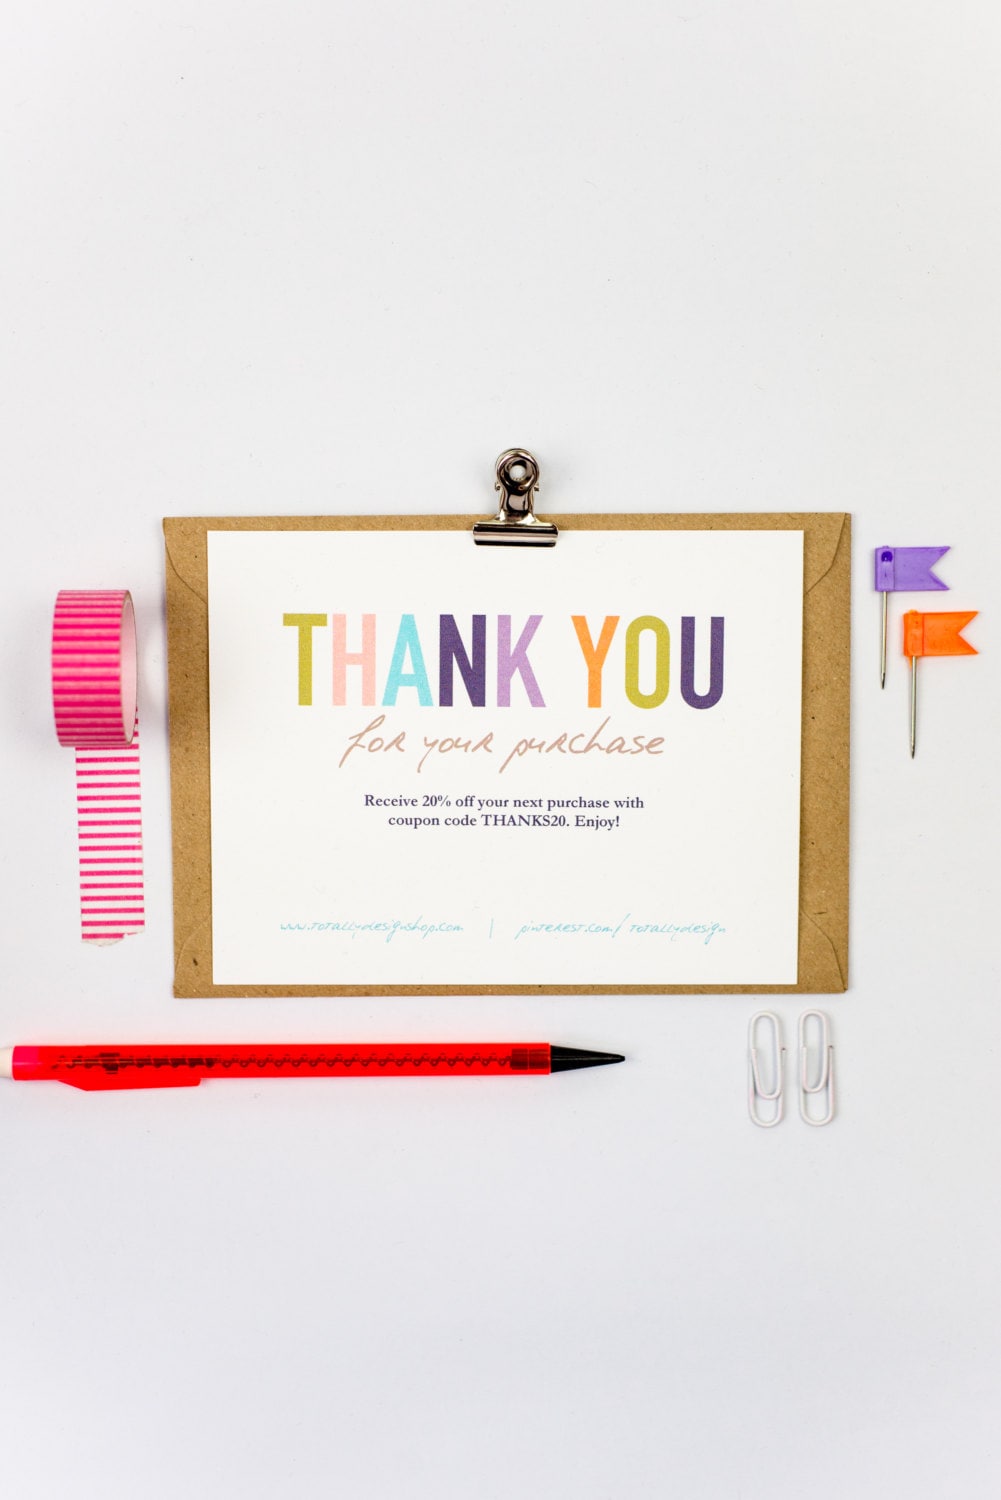 Powerpoint Thank You Card Template